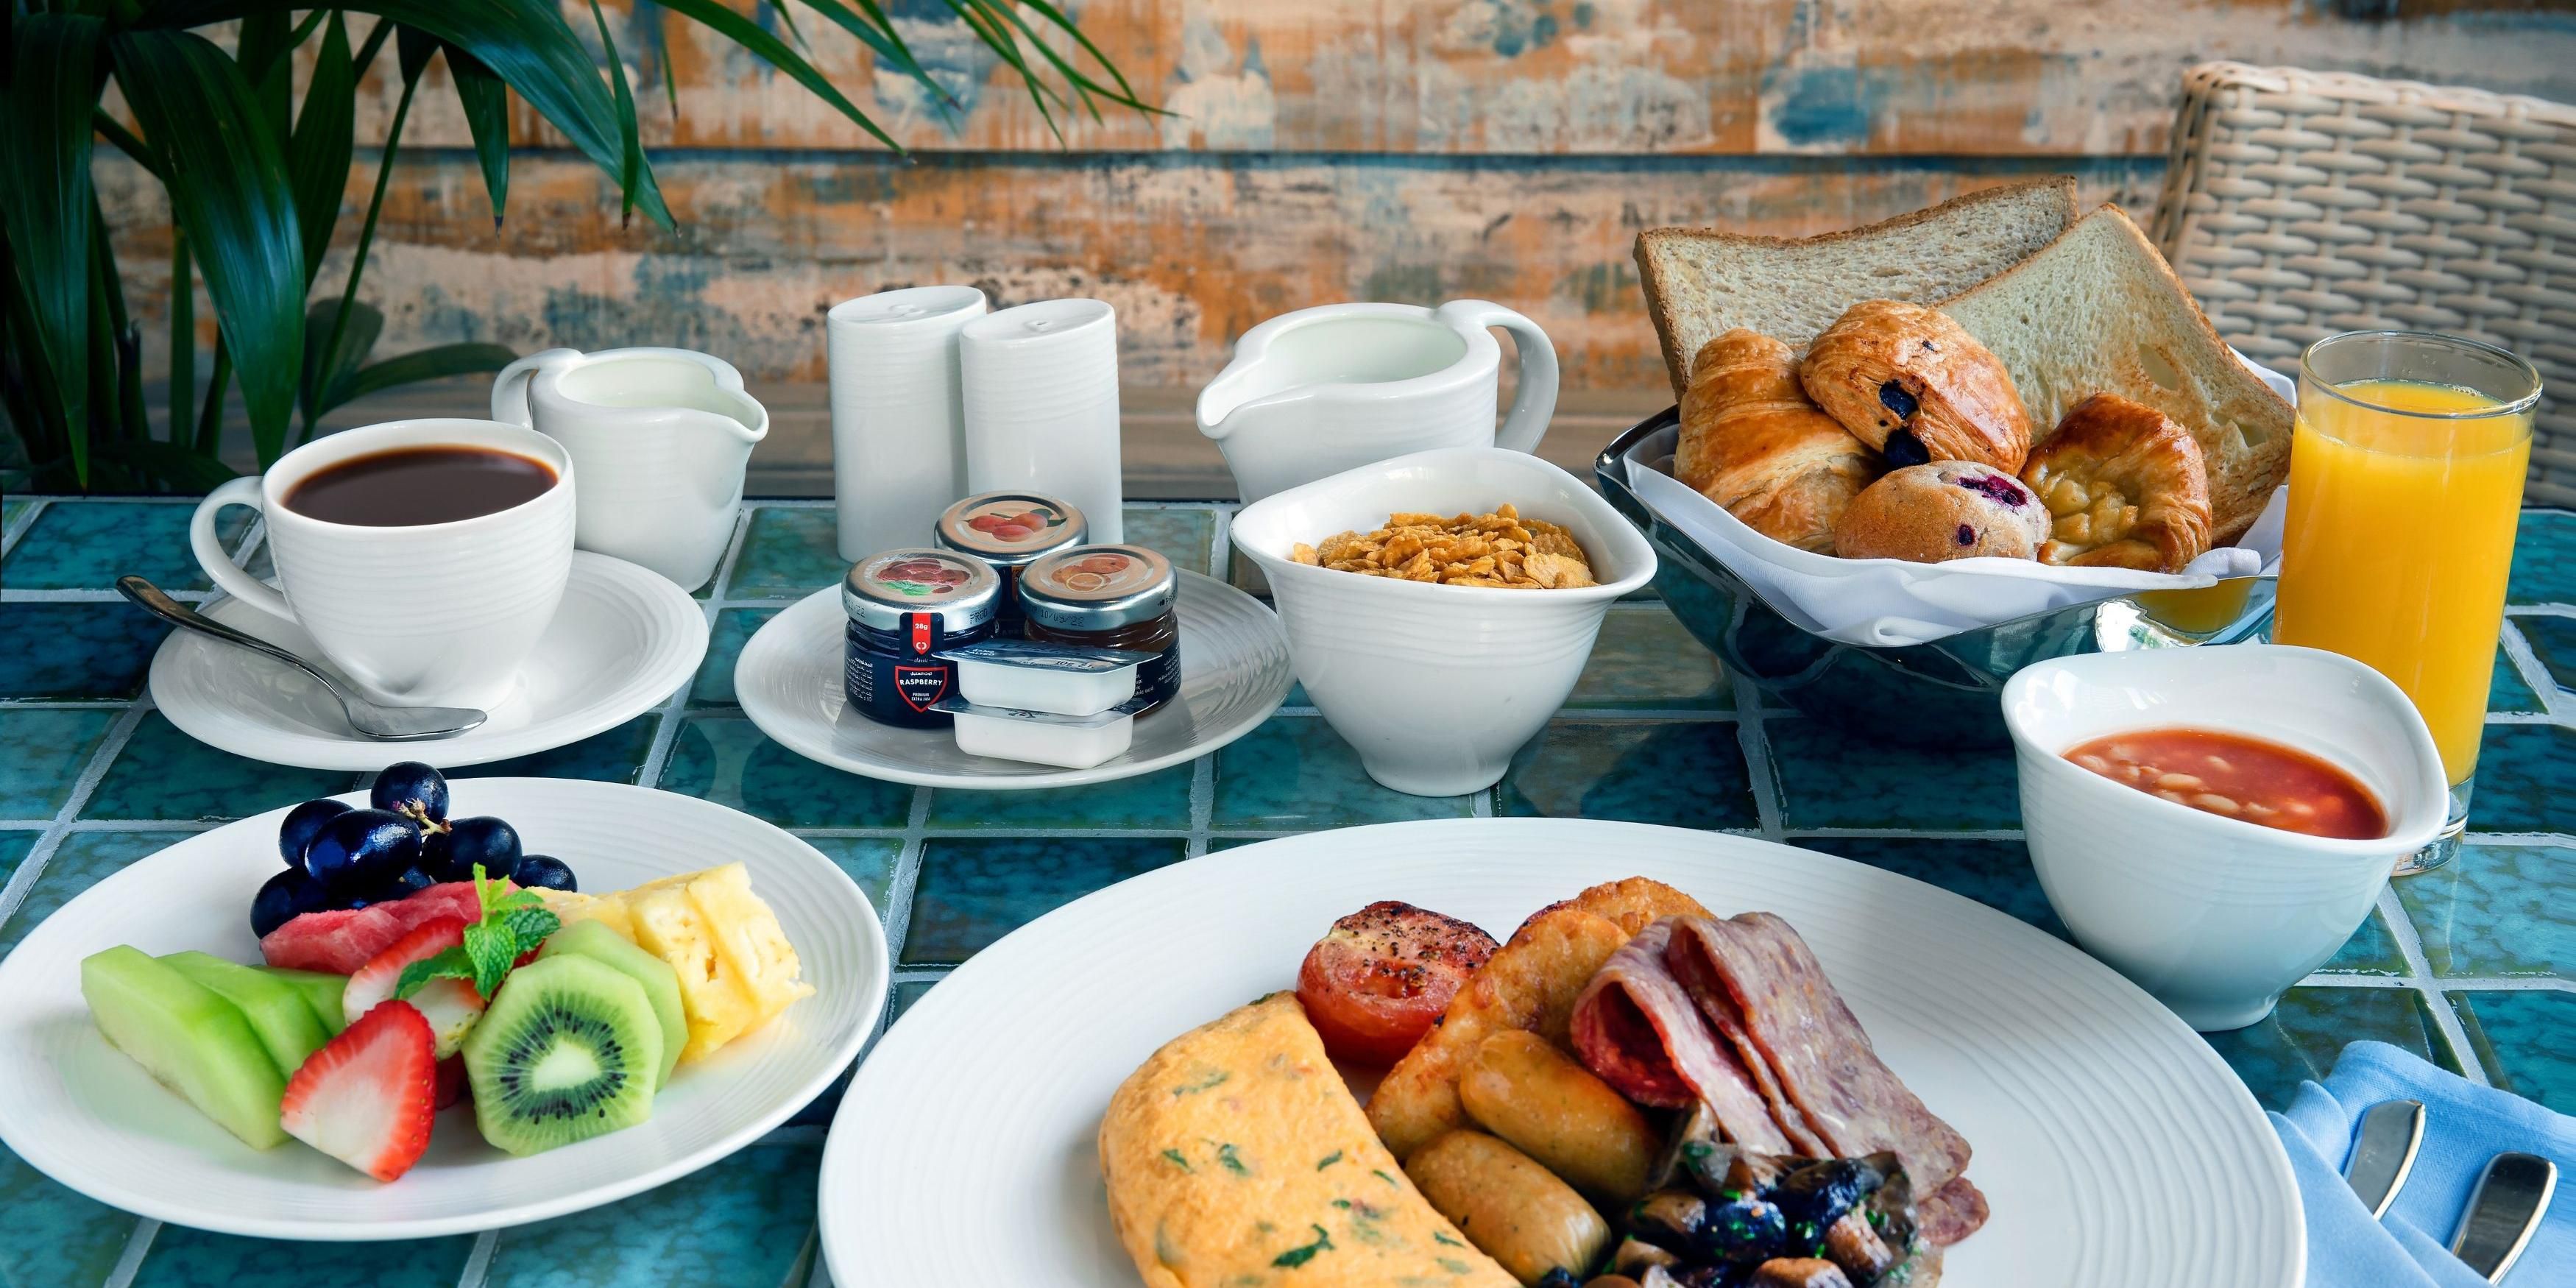 Breakfast selection at Lo+Cale Restaurant